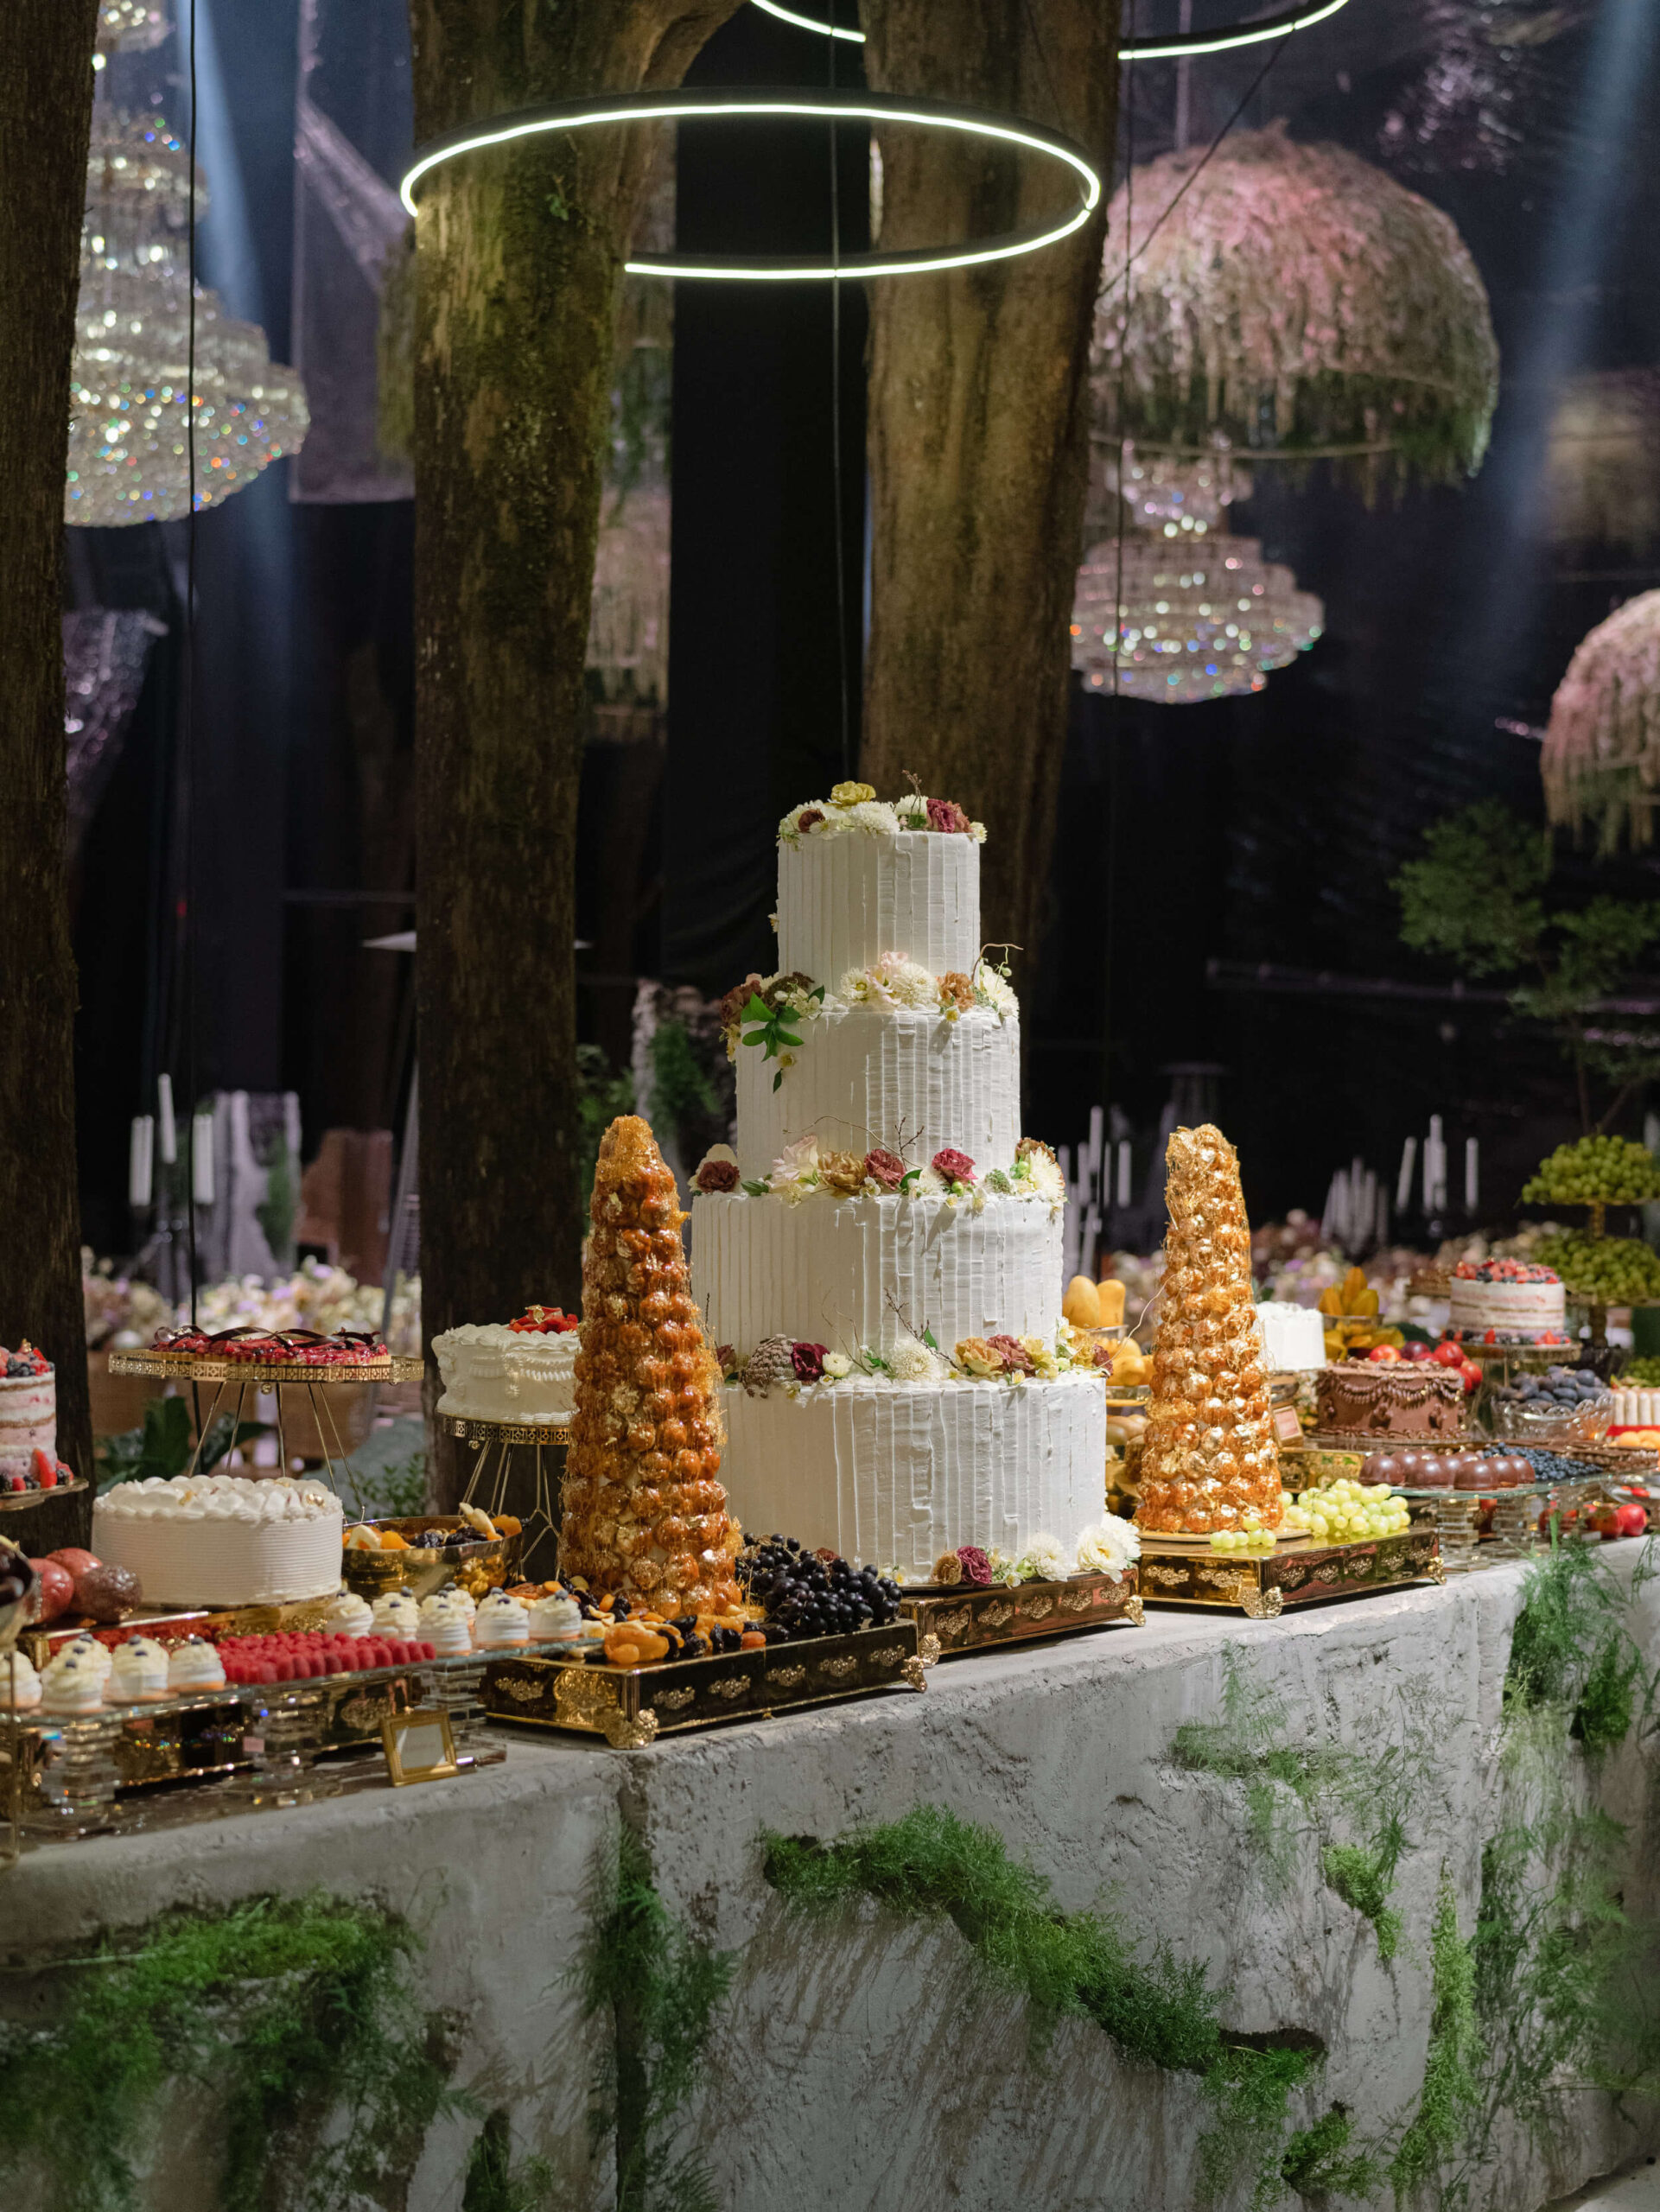 Cake and deserts lined on stone slab tables covered in moss